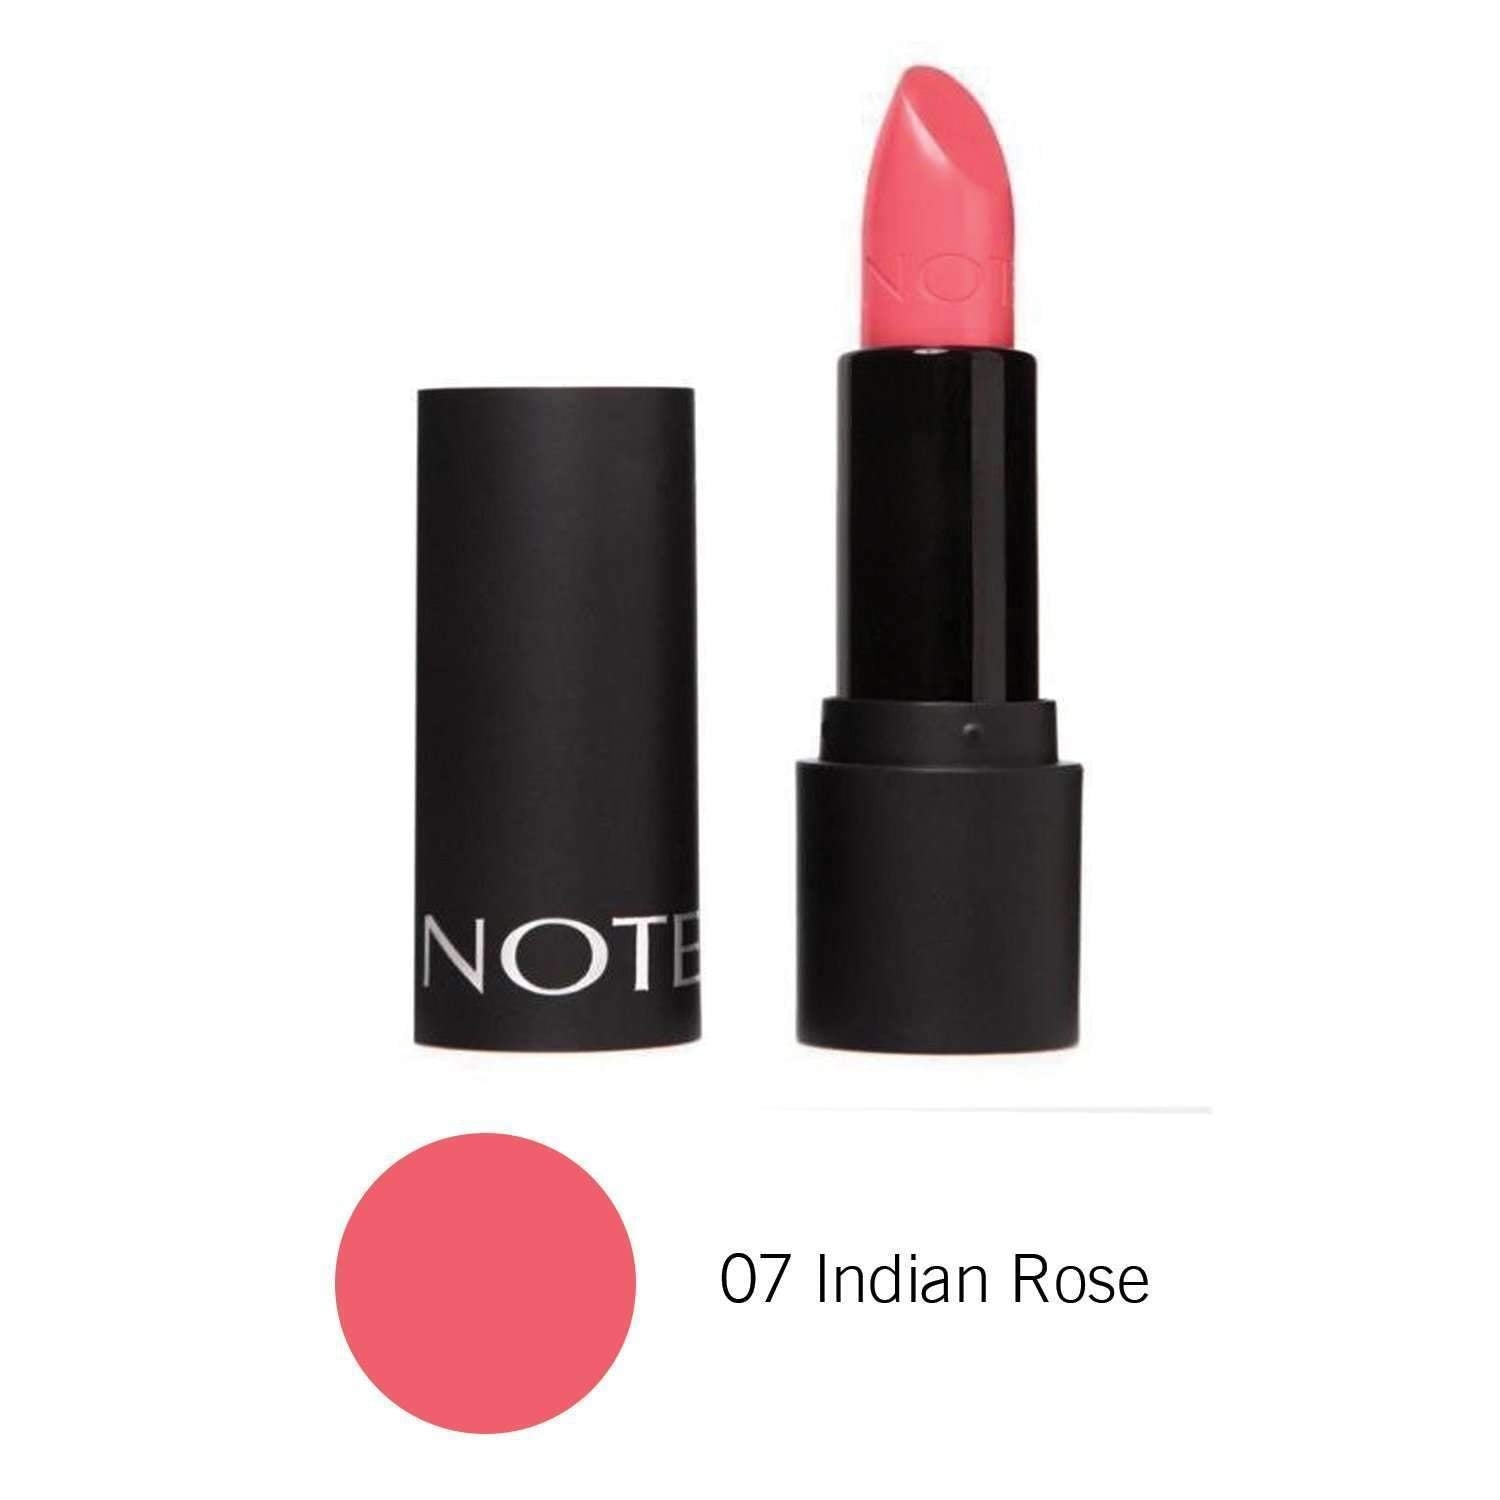 NOTE | Indian Rose Lipstick